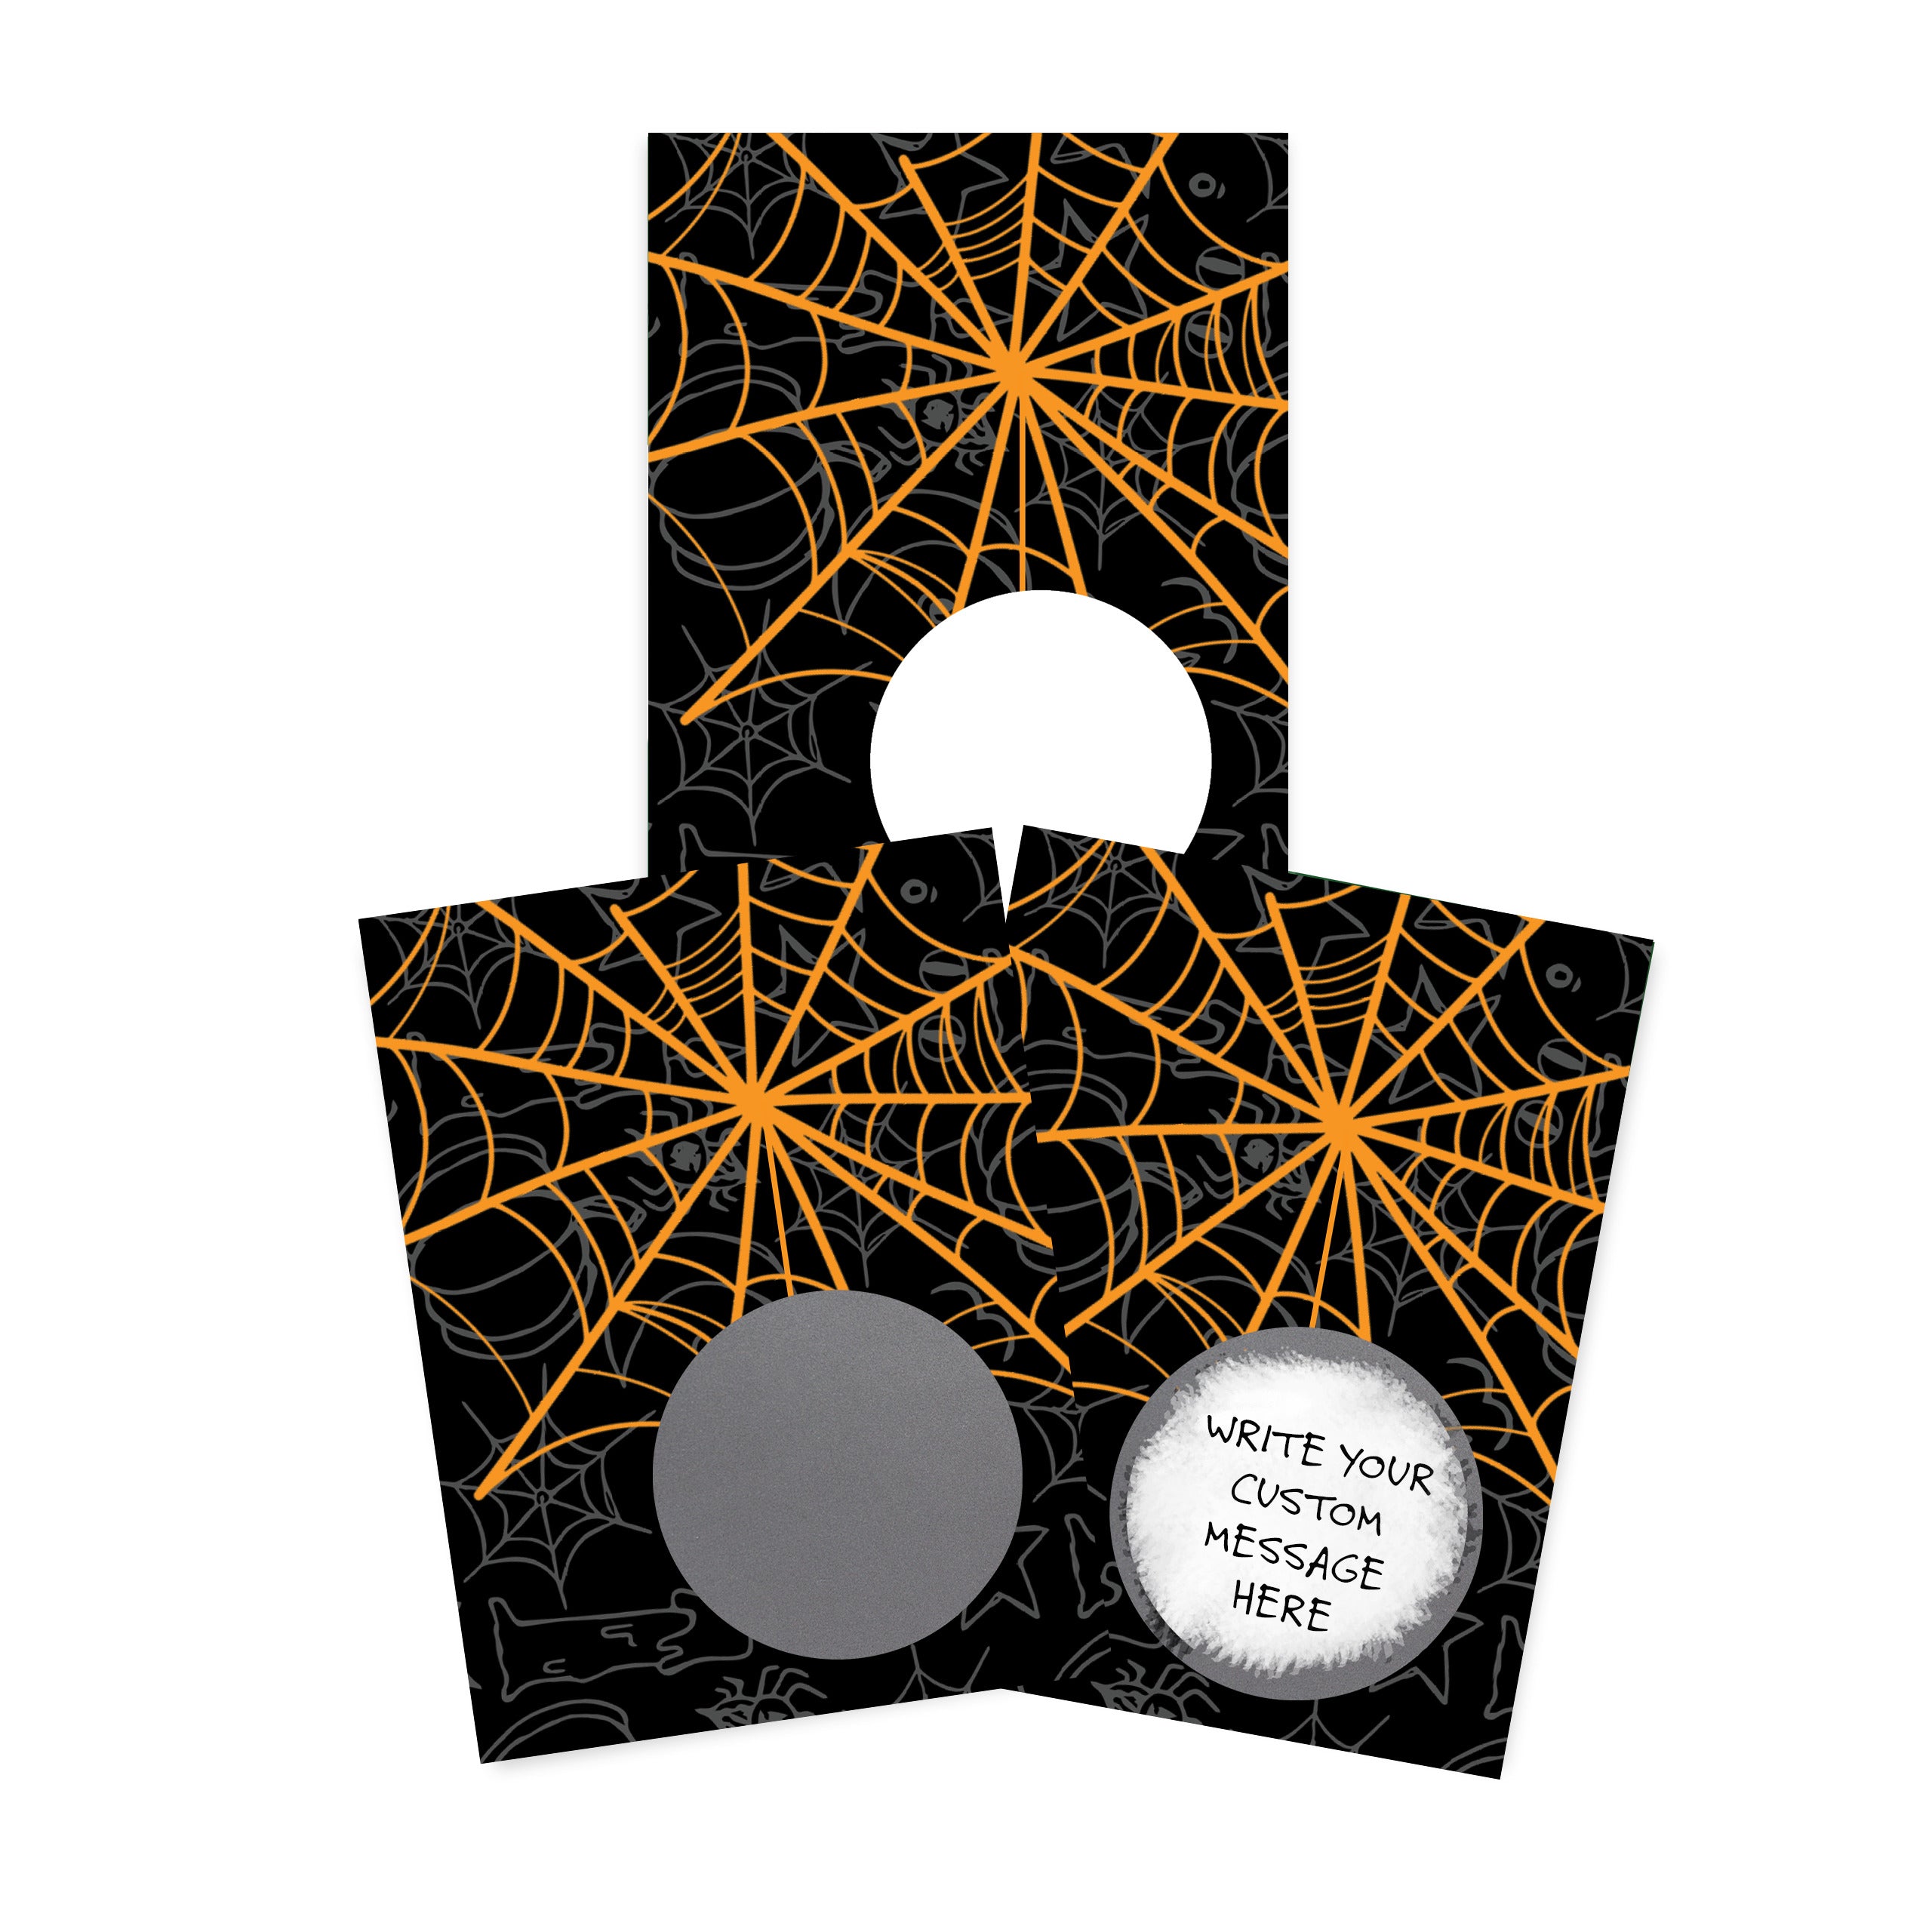 DIY Halloween Spider Web Make Your Own Scratch Offs - 50 Cards and 50 Scratch Off Stickers